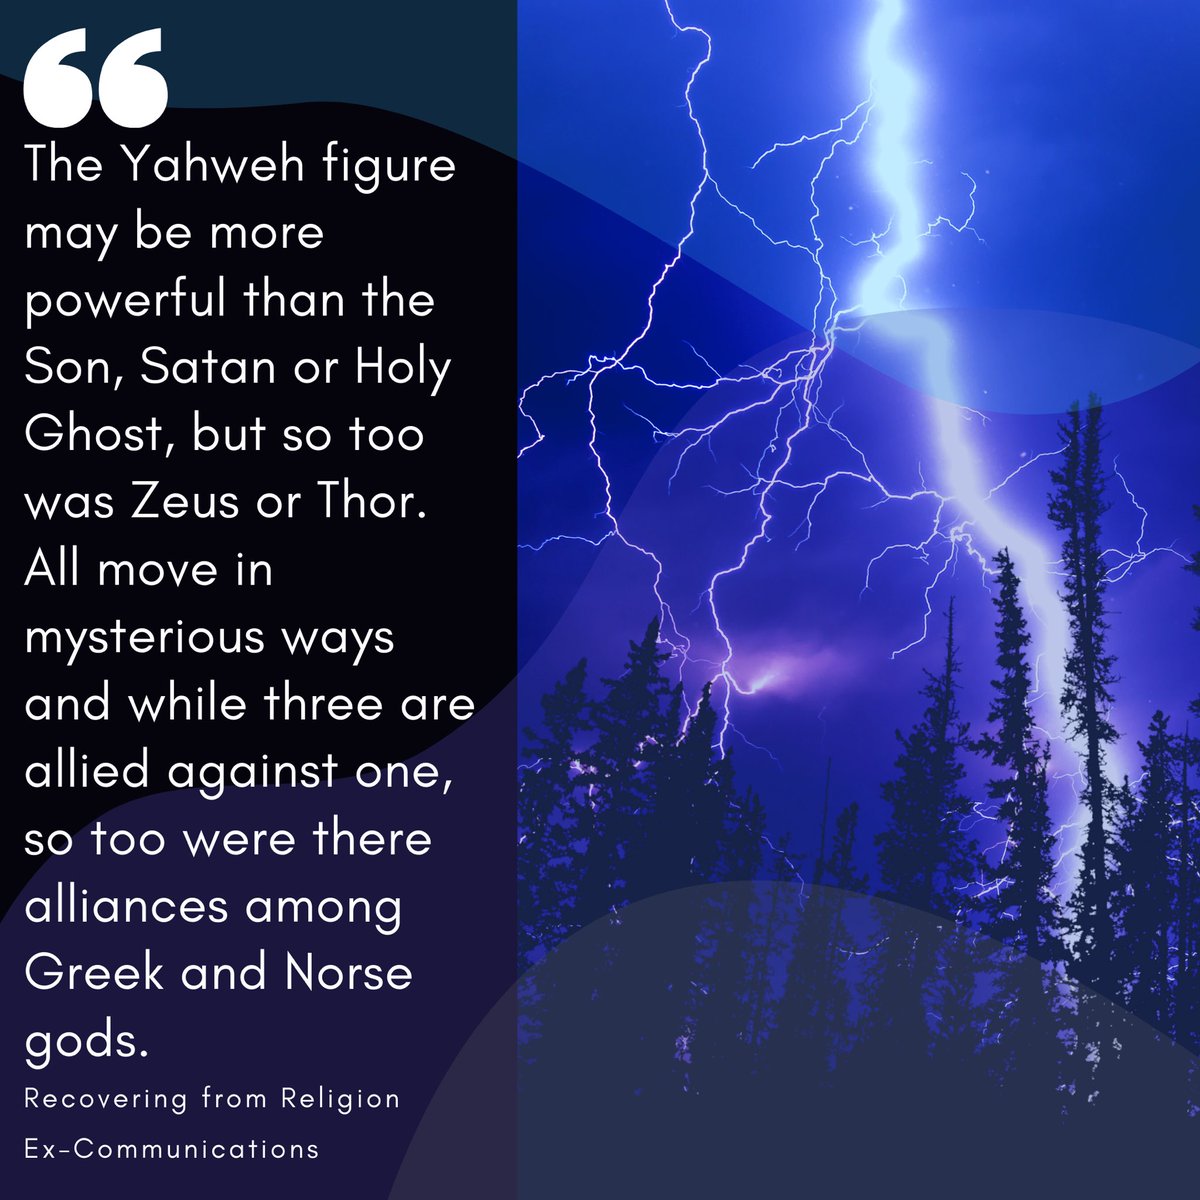 “The Yahweh figure may be more powerful than the Son, Satan or Holy Ghost, but so too was Zeus or Thor. All move in mysterious ways and while three are allied against one, so too were there alliances among Greek and Norse gods.”

Read more: https://t.co/UB4rDB6CoS https://t.co/8Y4F1zwCLl